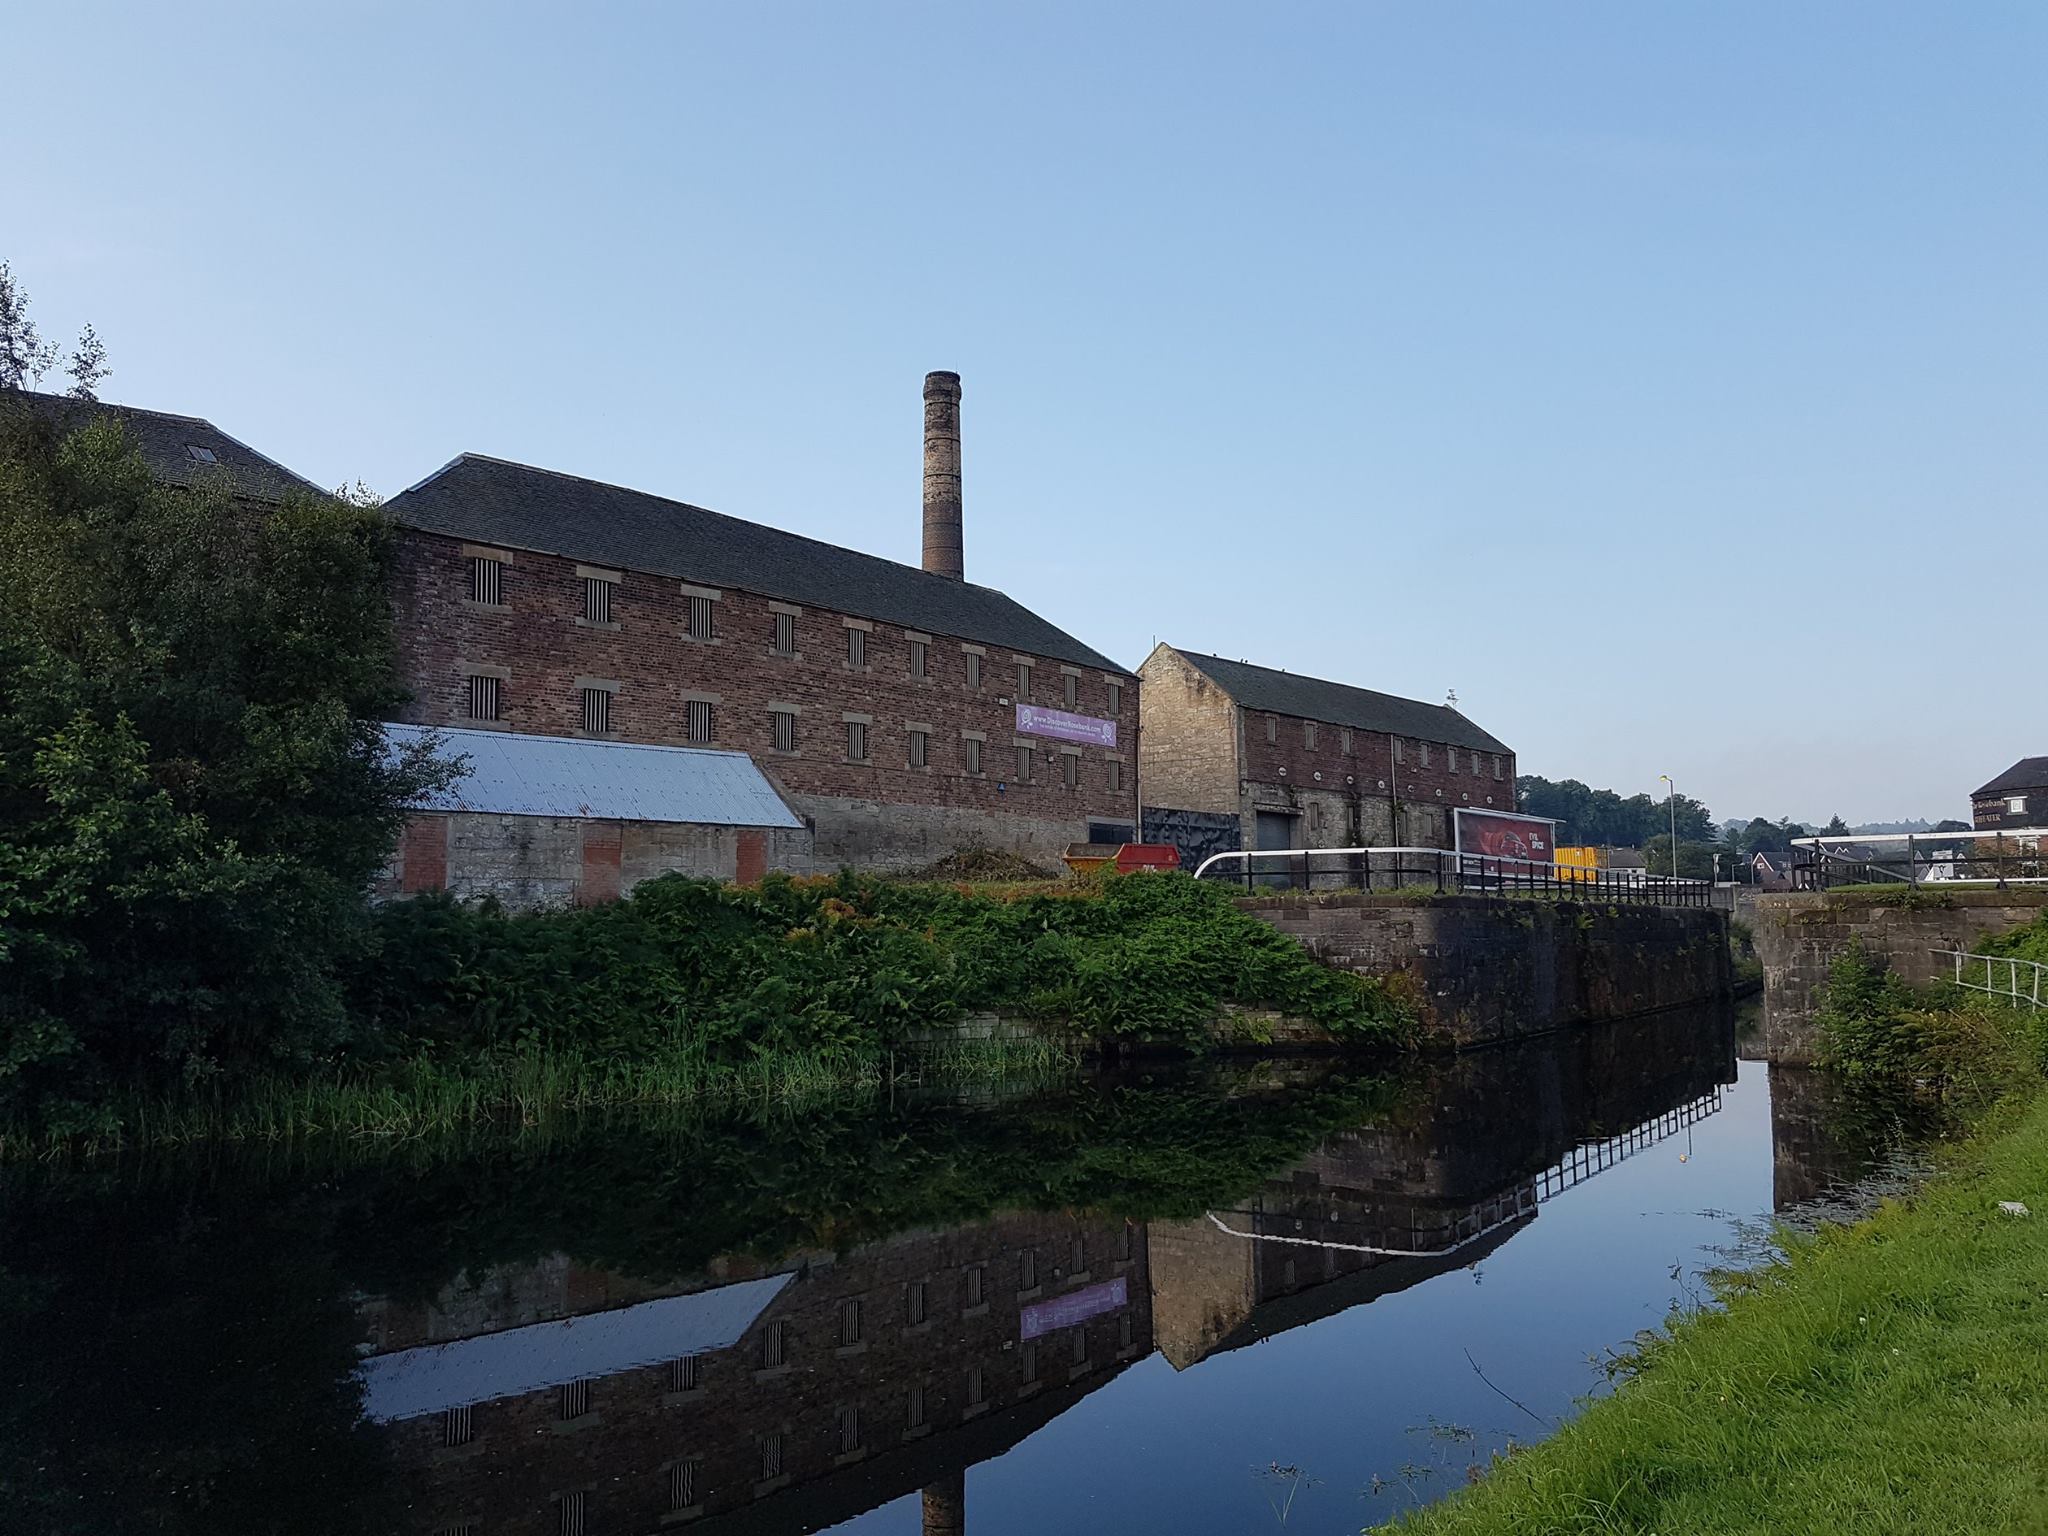 Rosebank's warehouses along the Forth & Clyde Canal. Photo courtesy Colin Taylor.